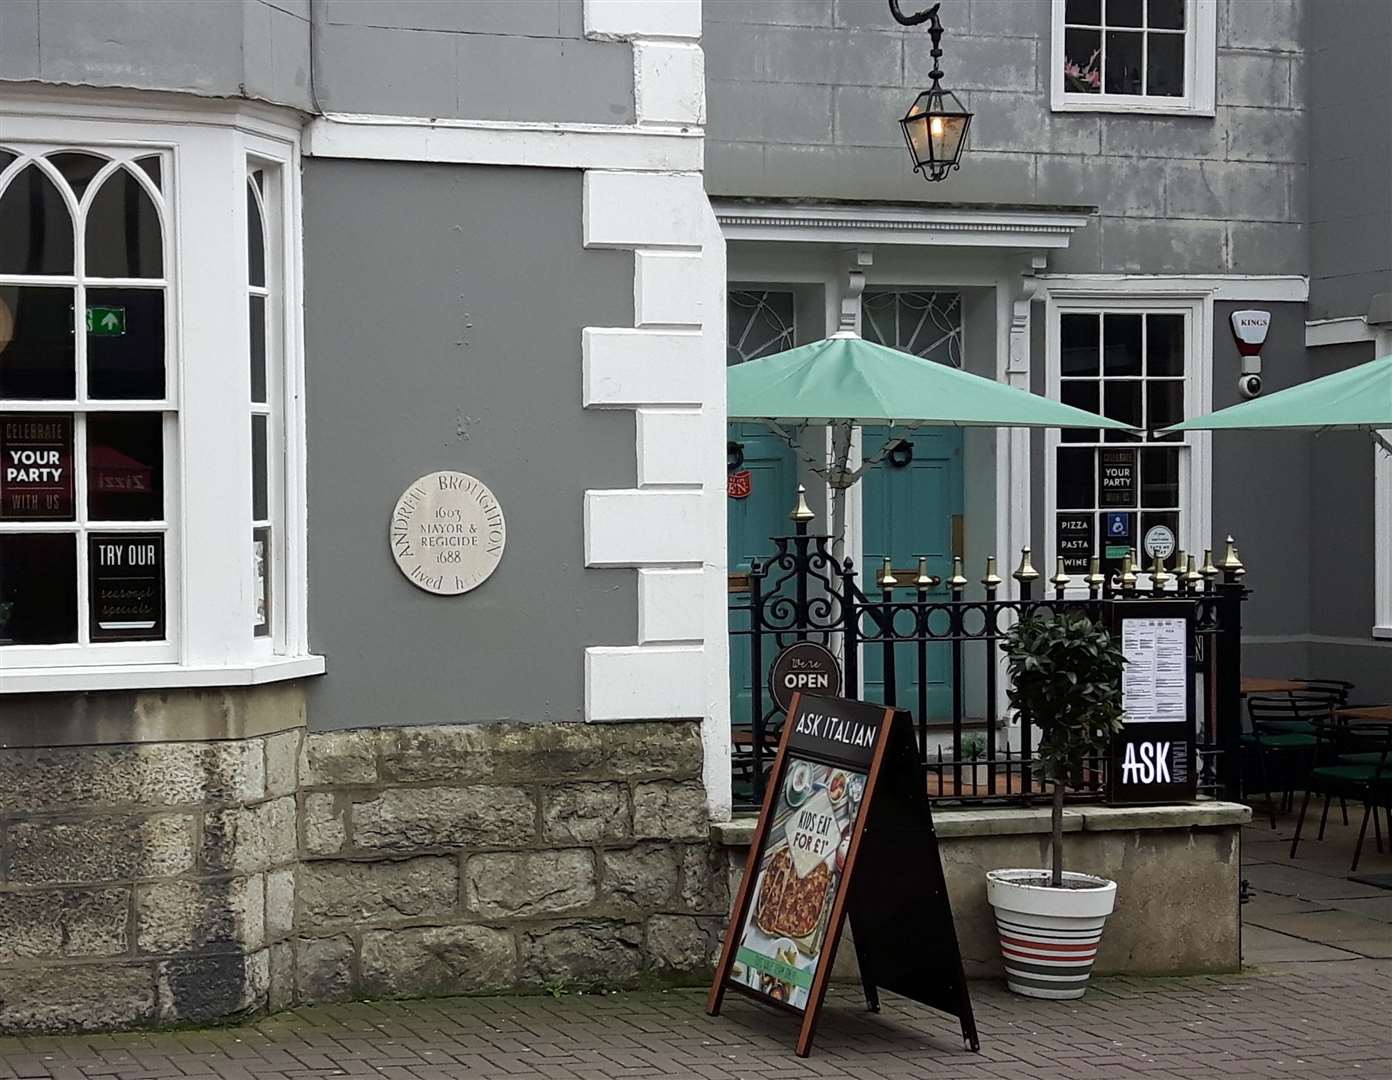 Thai restaurant The Giggling Squid will replace ASK Italian on Earl Street, Maidstone, which closed down last year due to the Covid-19 pandemic